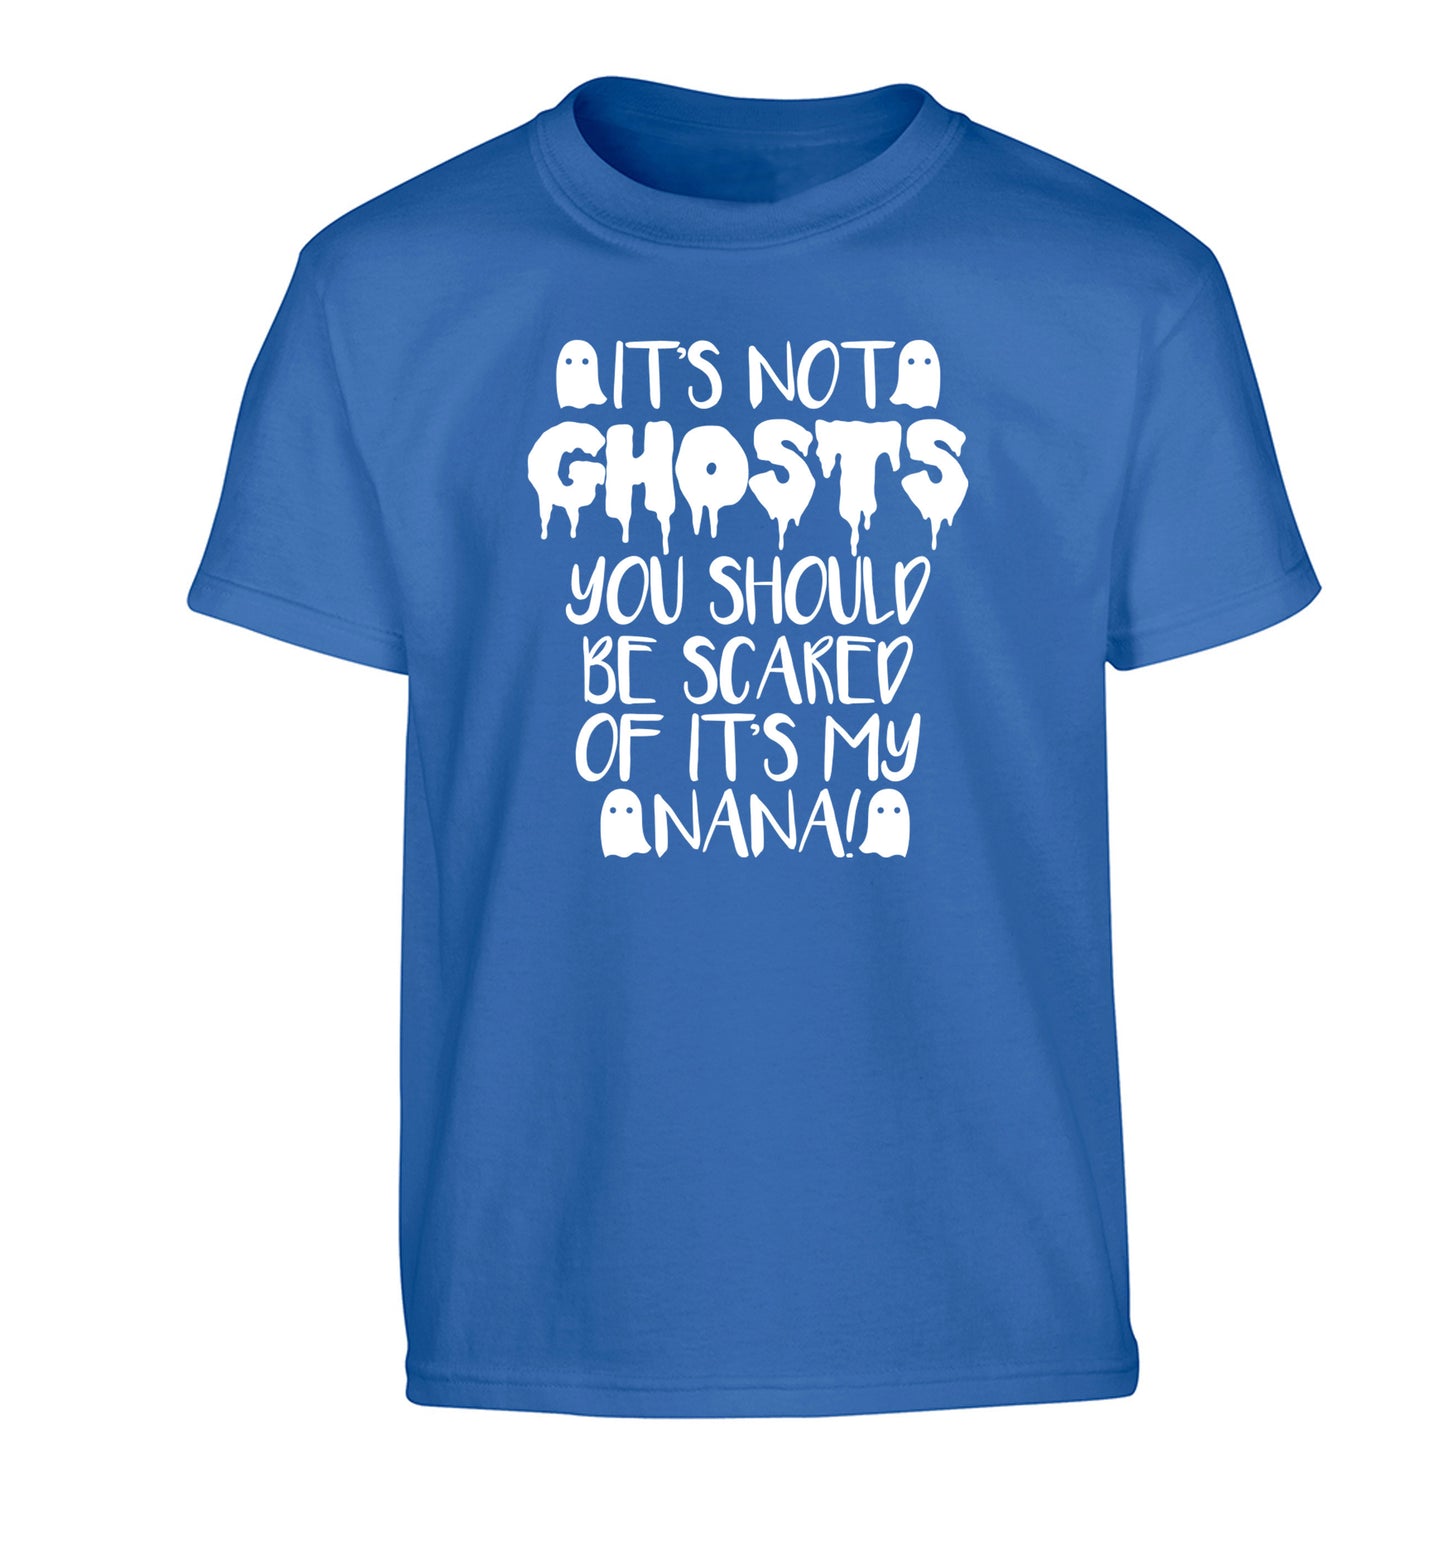 It's not ghosts you should be scared of it's my nana! Children's blue Tshirt 12-14 Years